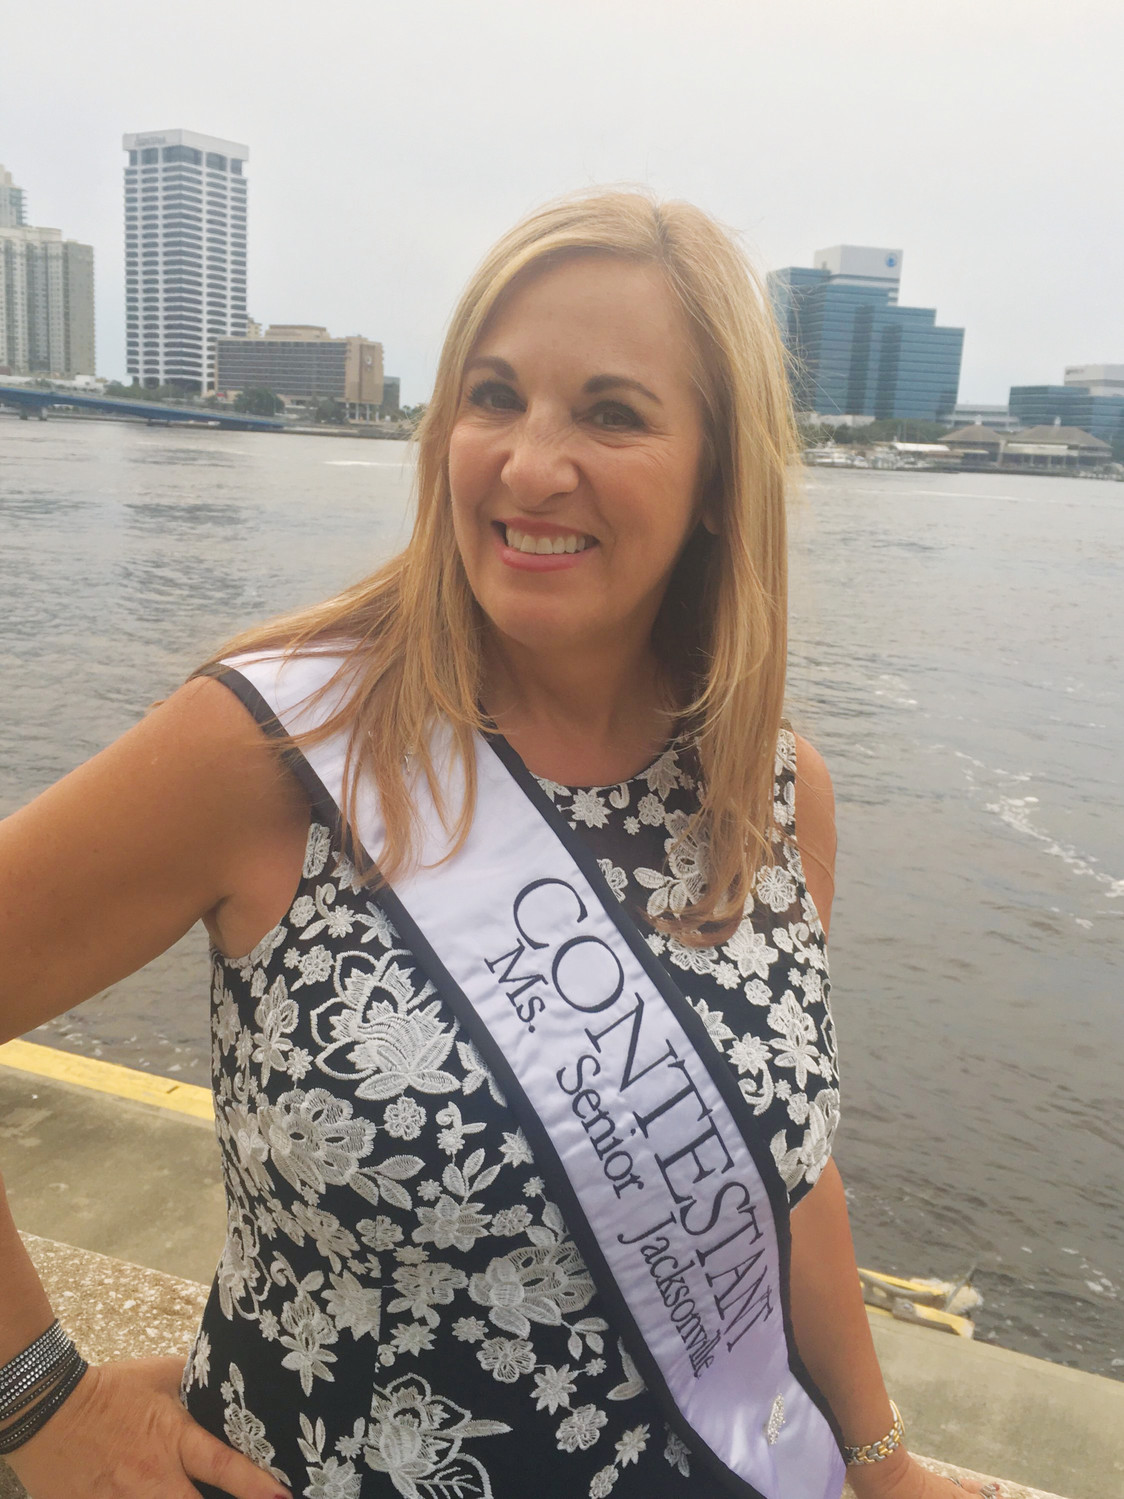 Ponte Vedra Beach resident Kim St. Clair Seals will compete for the 2018 Ms. Senior Jacksonville crown on Saturday, July 21 at the University of North Florida.